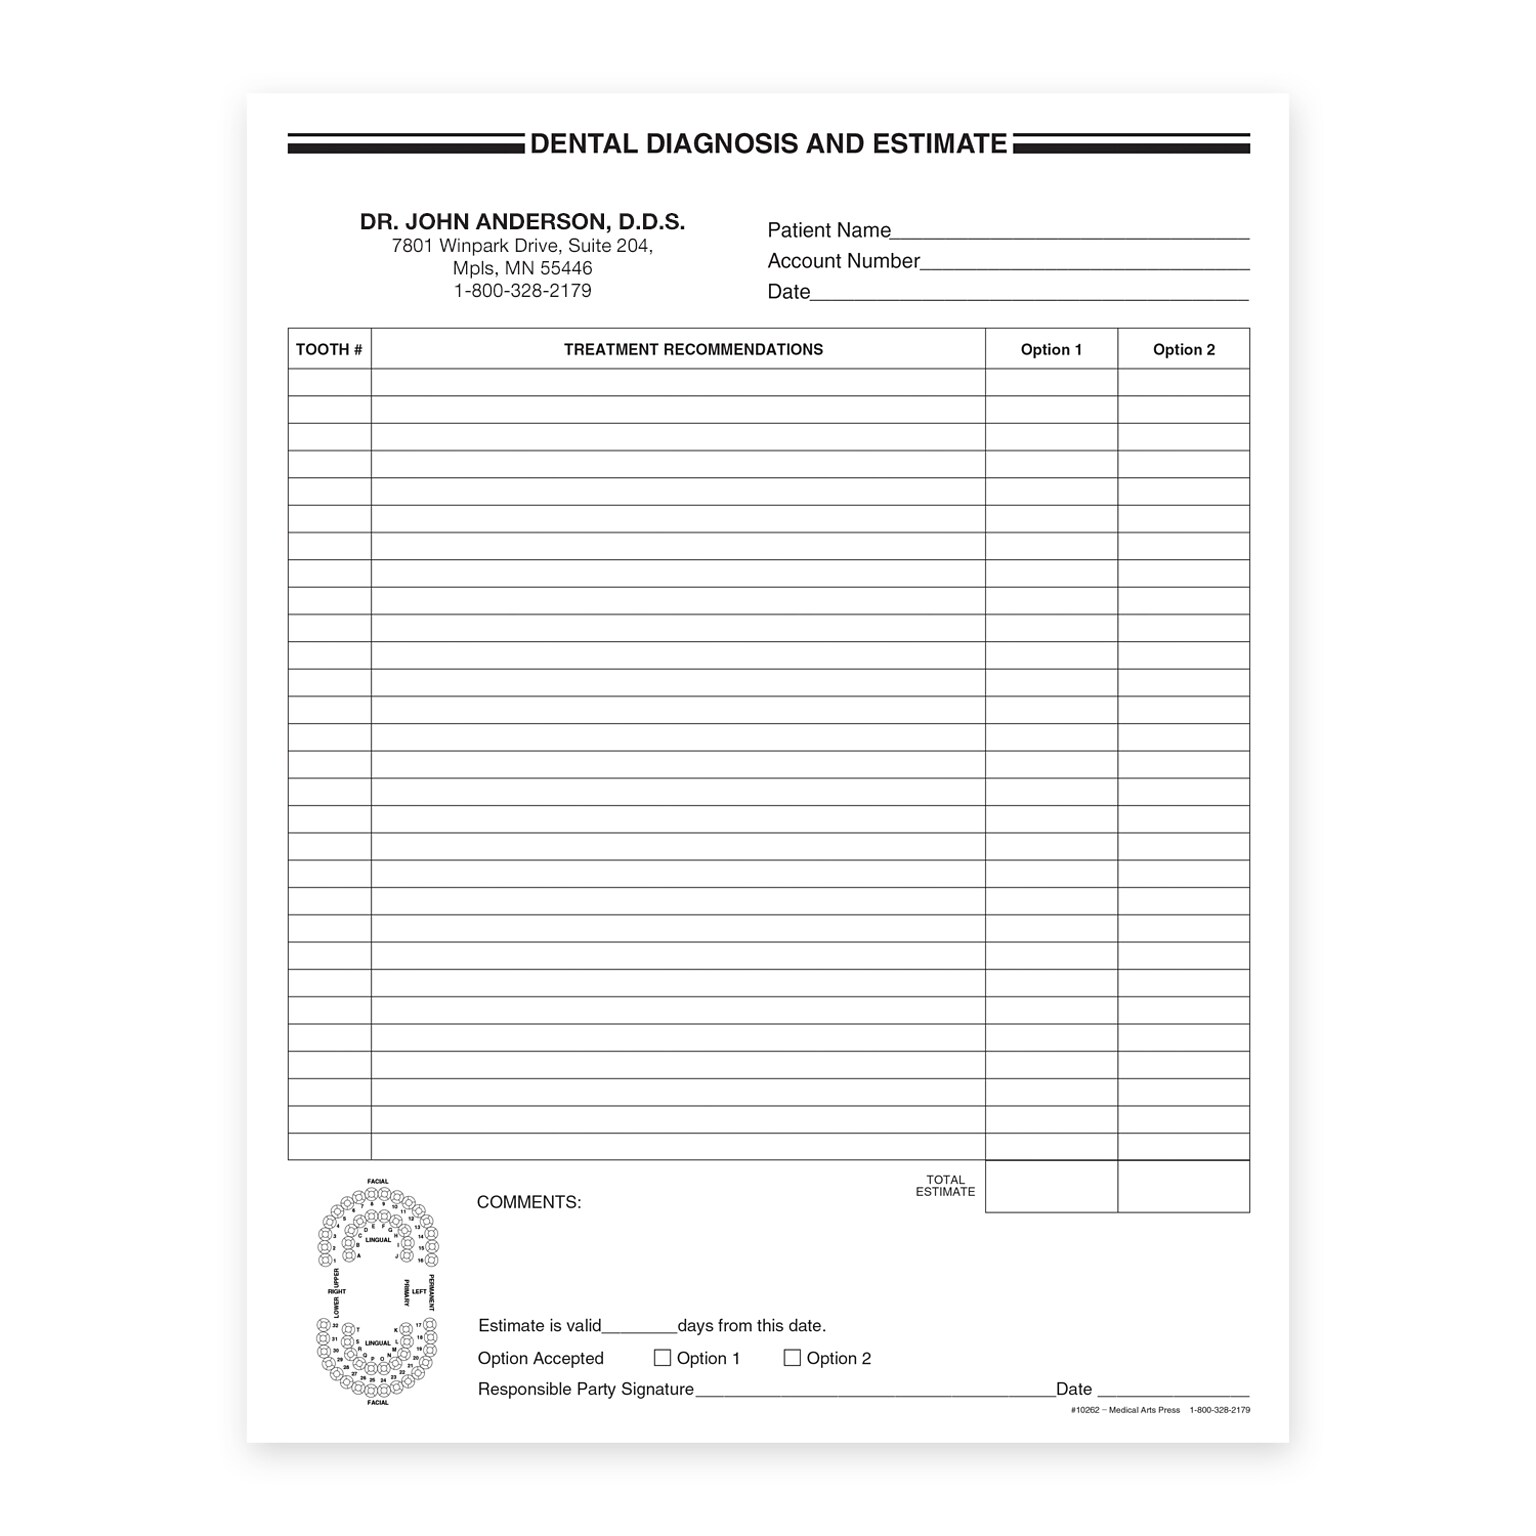 Custom Carbonless 2-Part Dental Diagnosis and Estimate Forms, 8-1/2 x 11, 250 Sheets per Pack